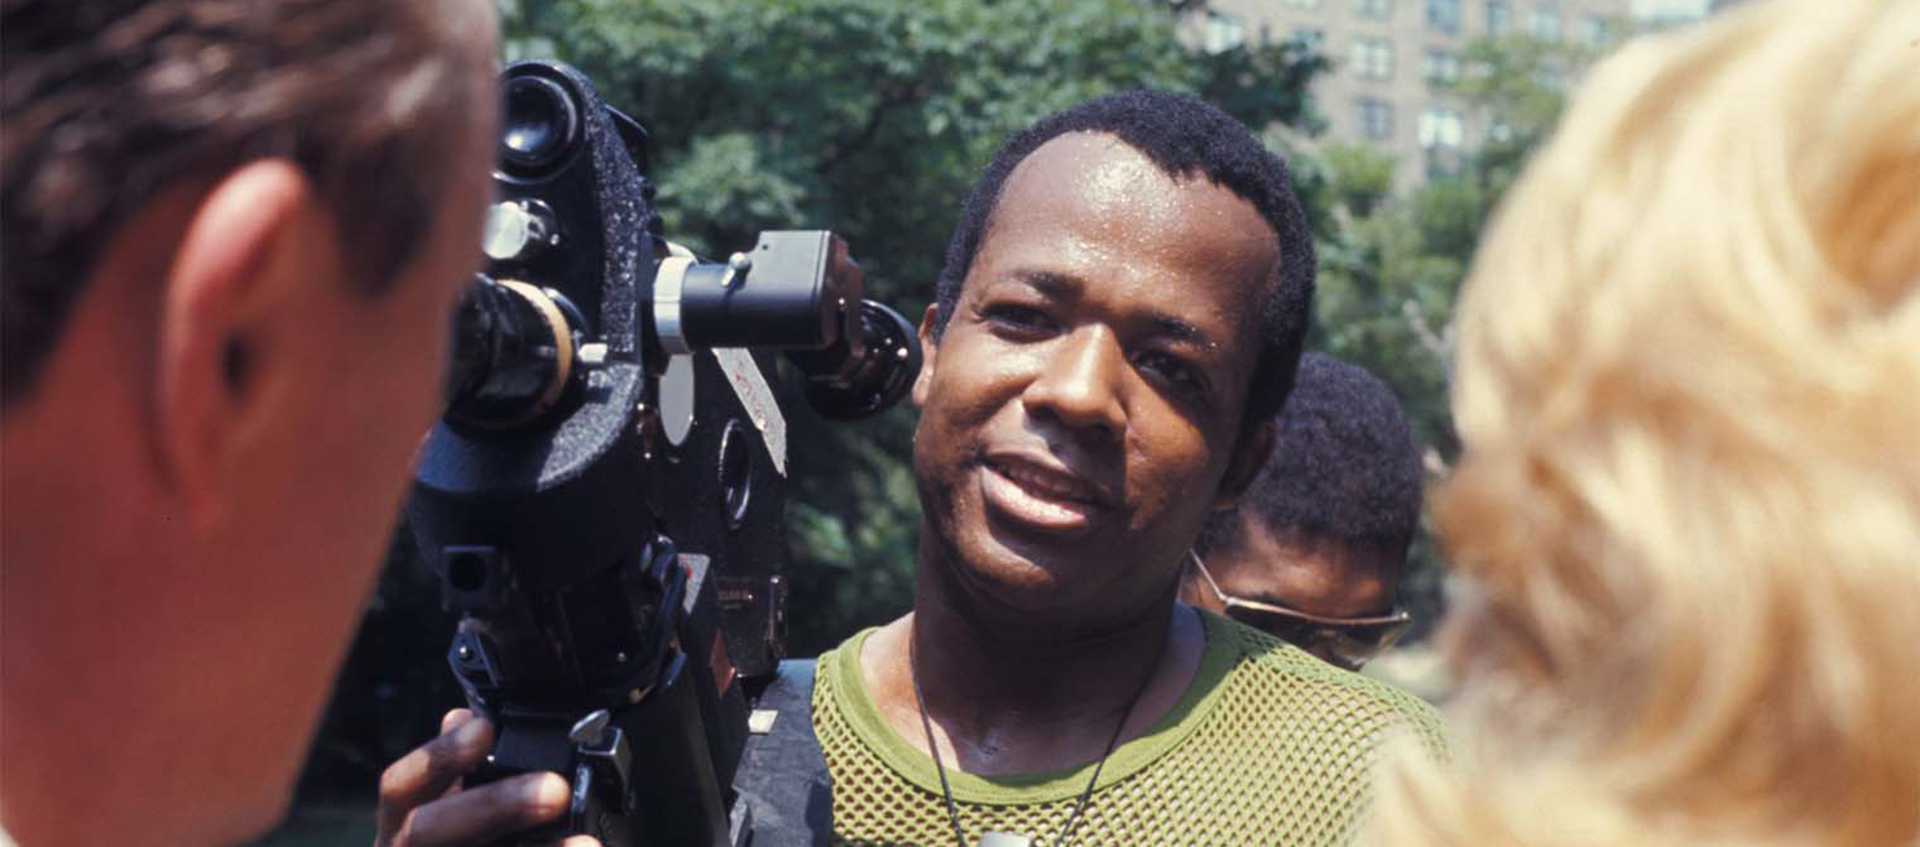 Filmmaker William Greaves stands in front of a man and a woman. He is holding a film camera.